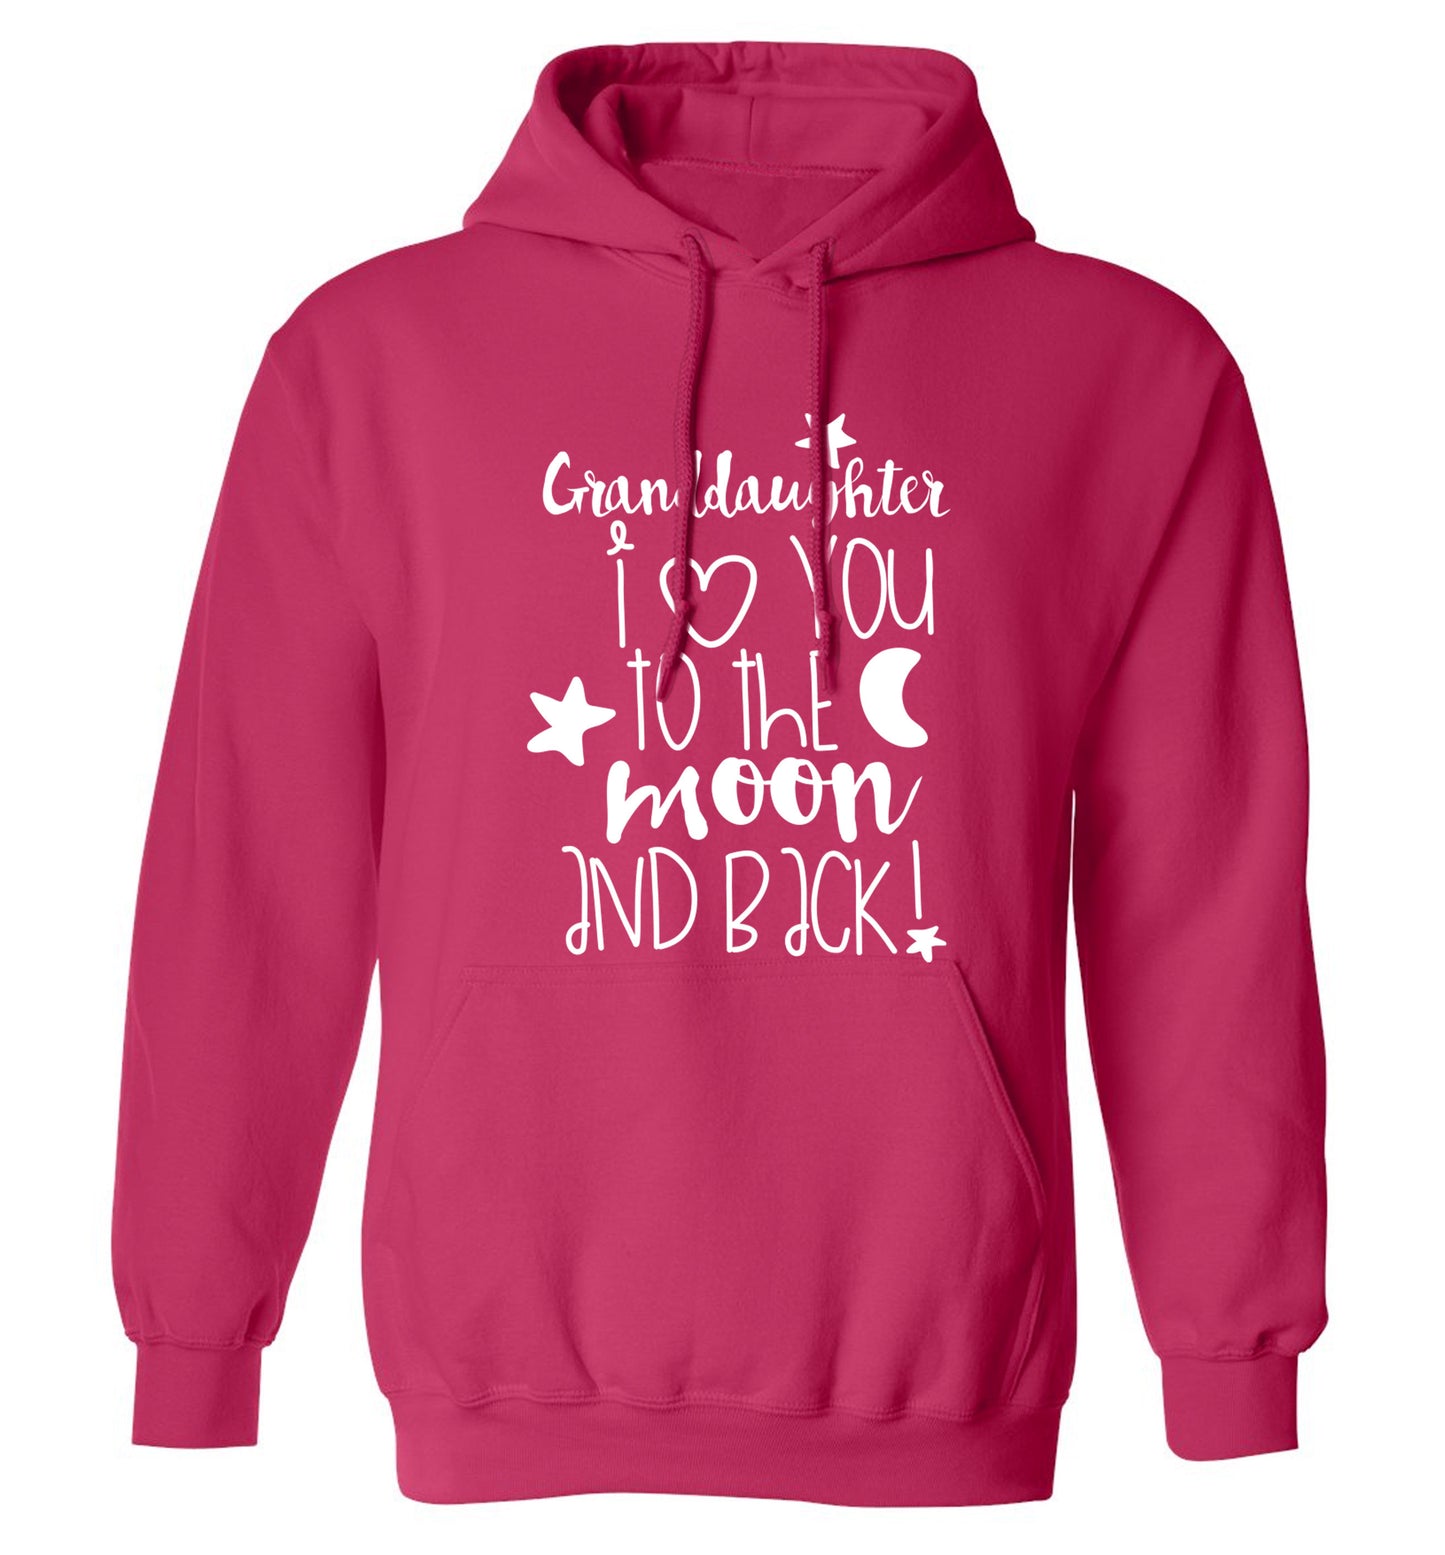 Granddaughter I love you to the moon and back adults unisex pink hoodie 2XL